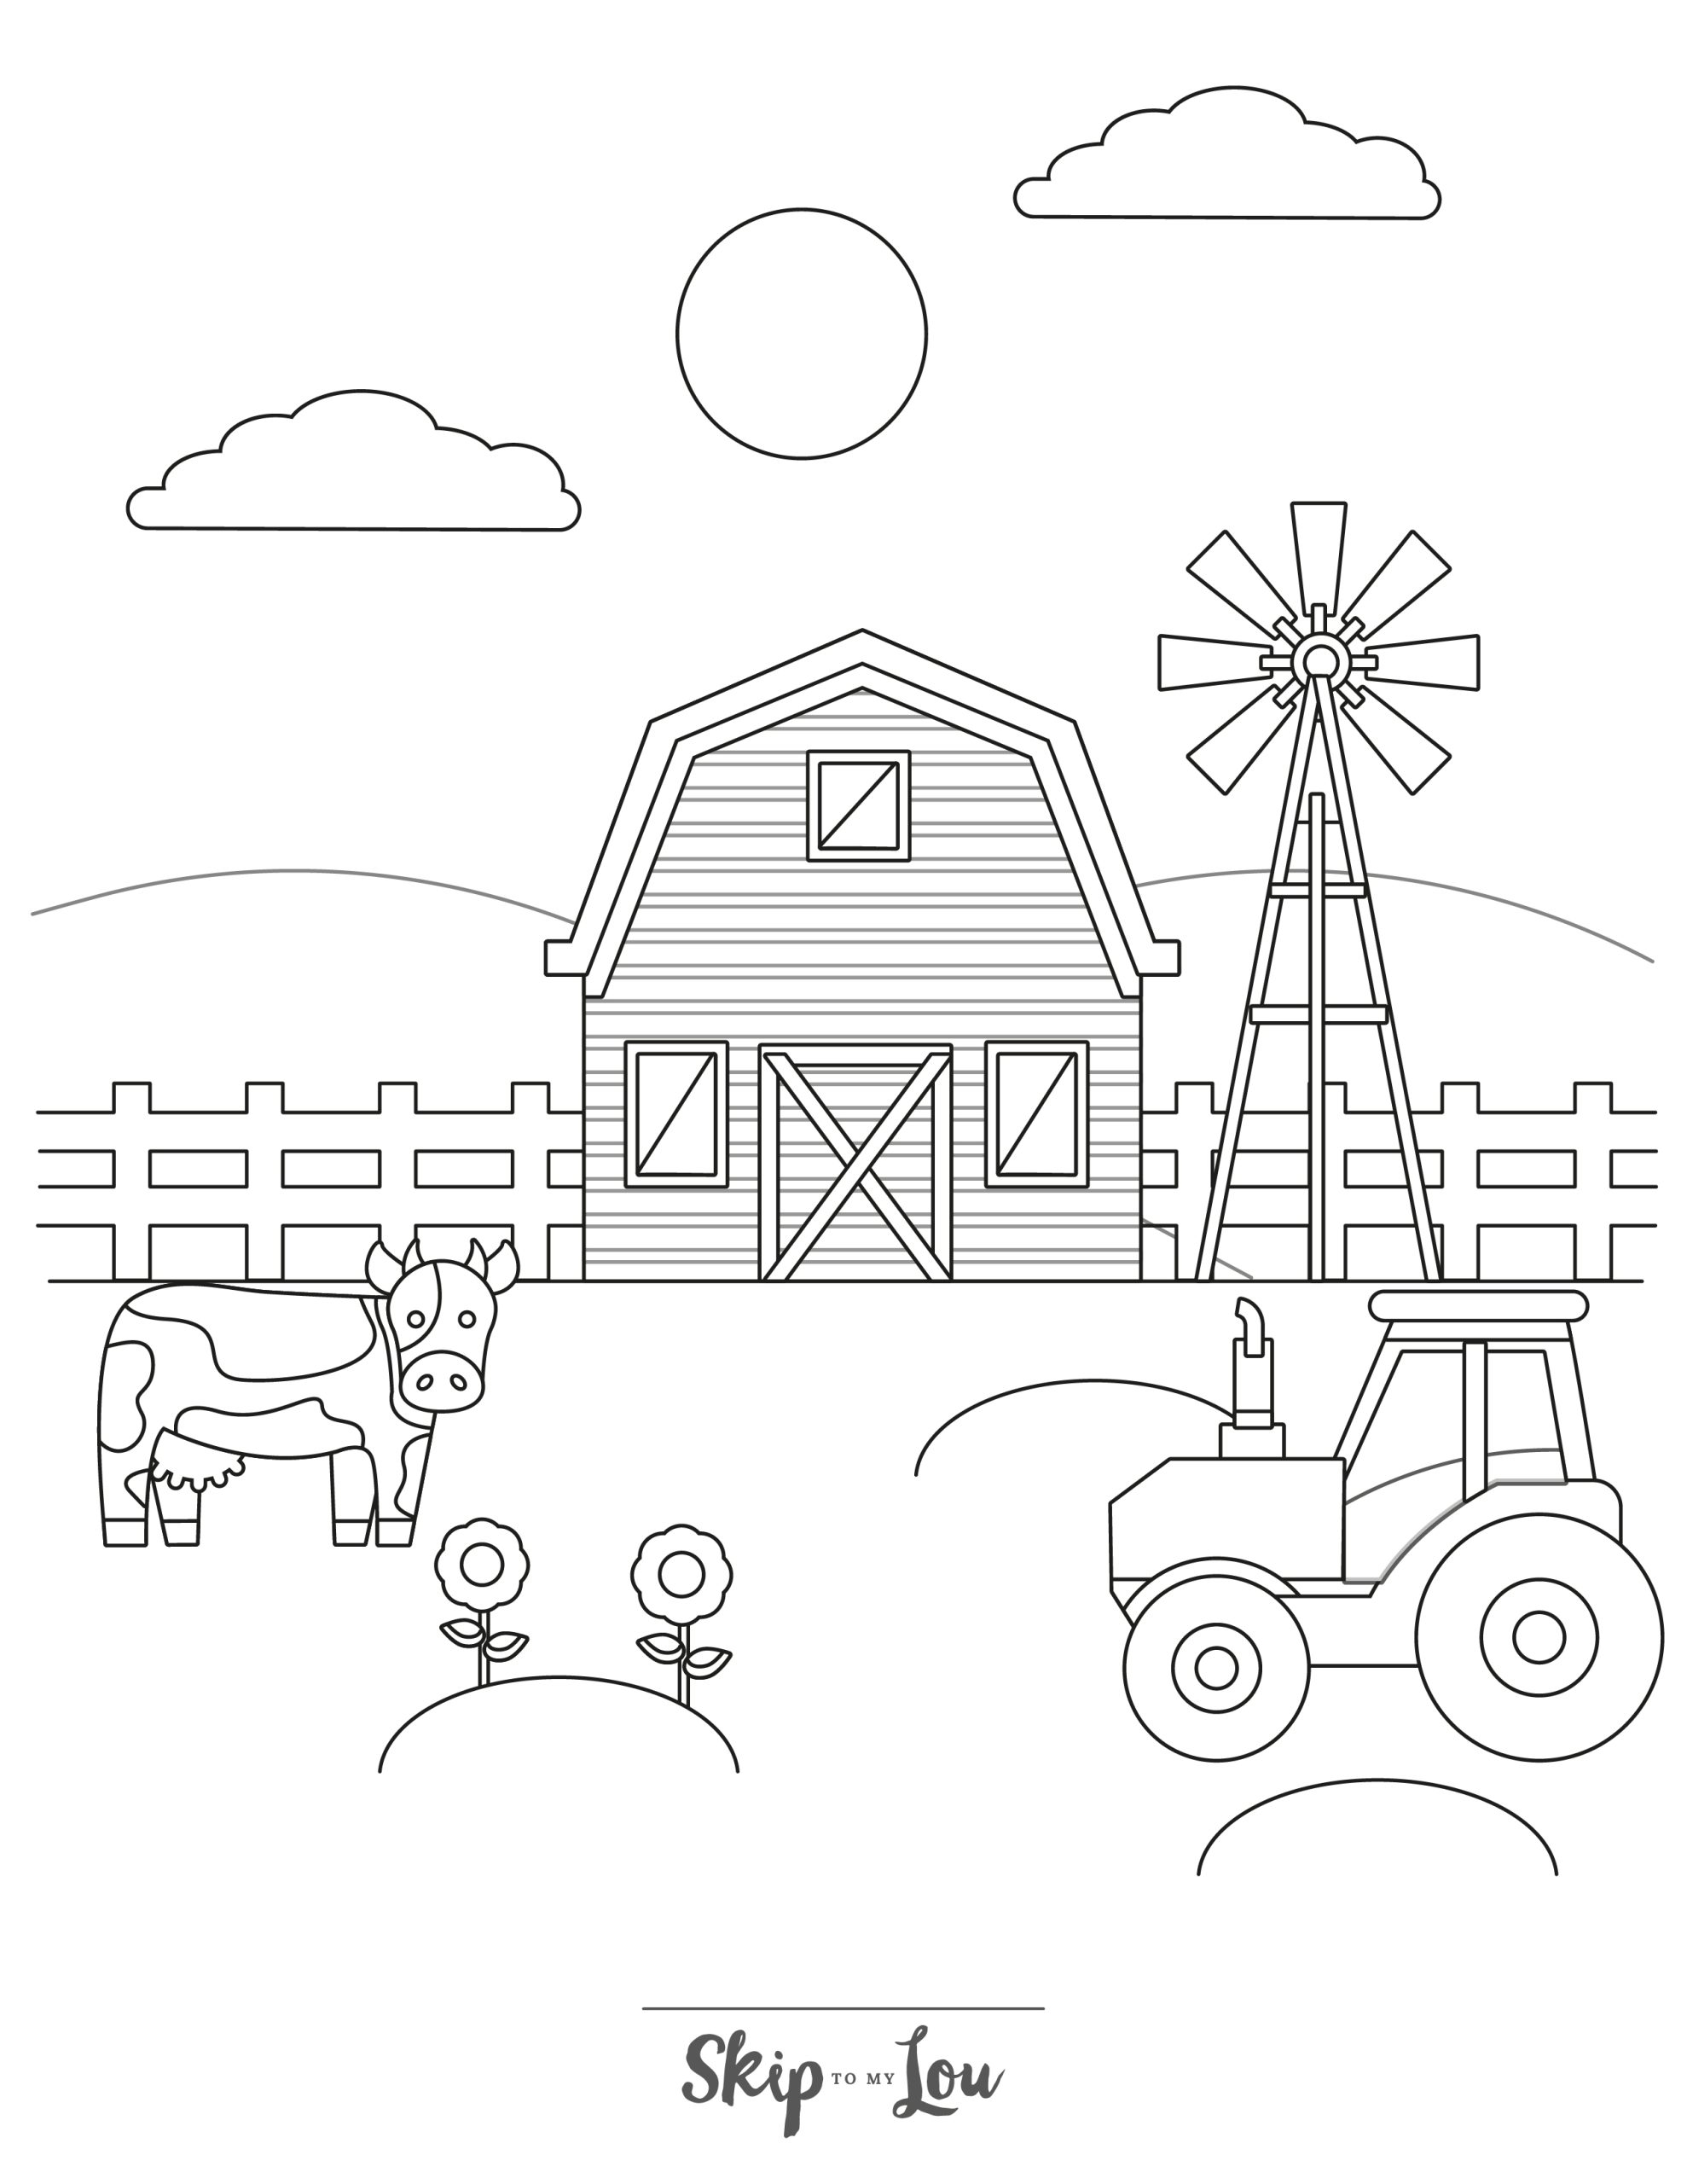 Farm Coloring Page 1 - A line drawing of a barn scene with a cow, tractor, and windmill.